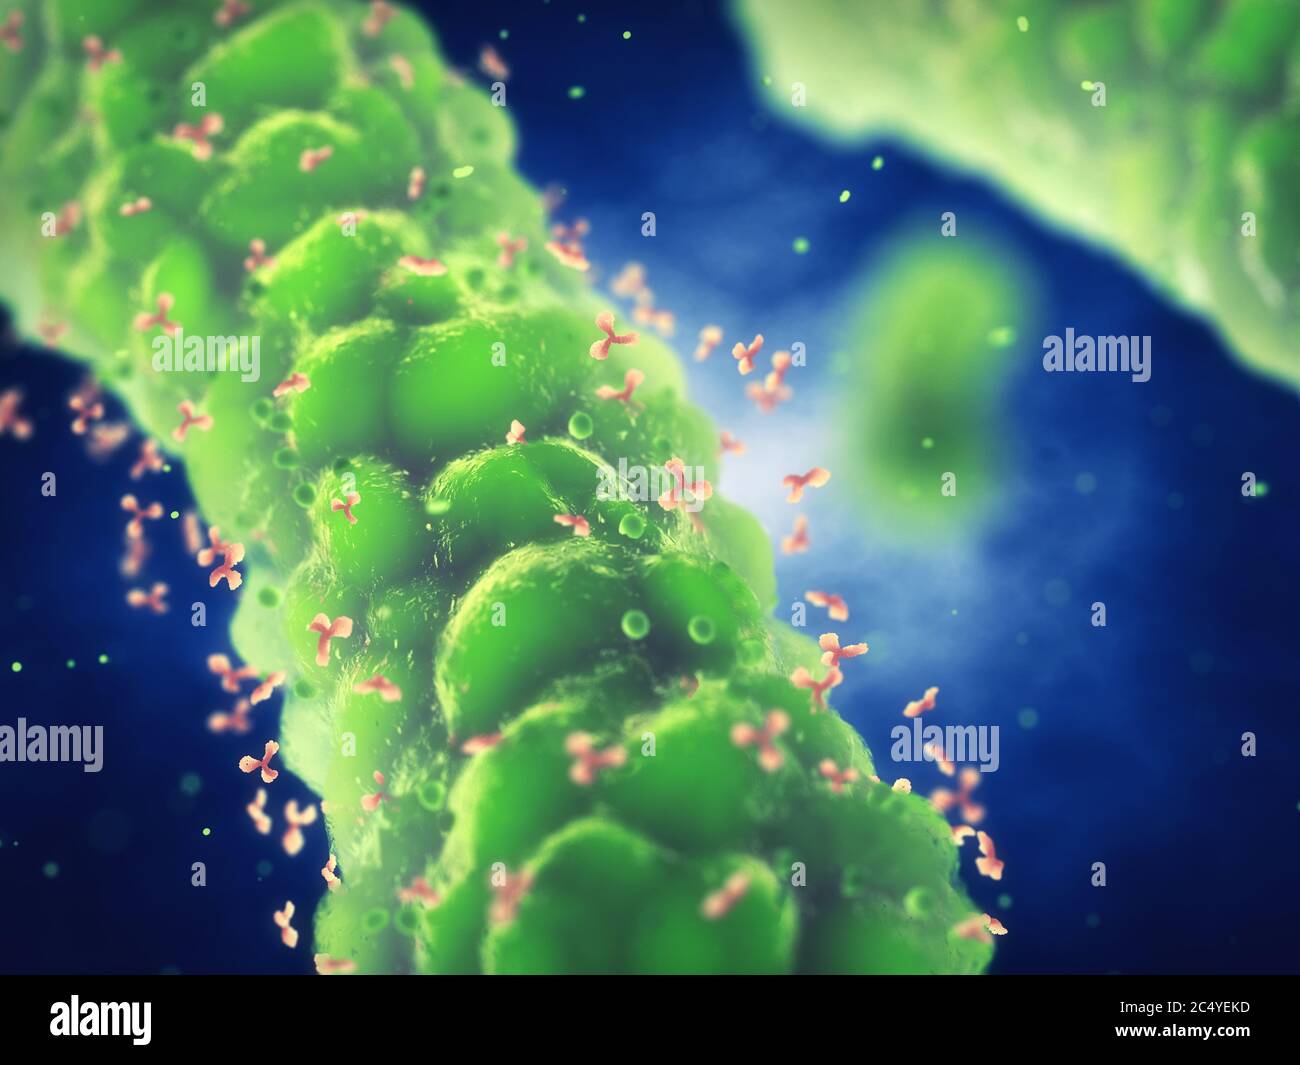 Antibodies attaching to pathogenic bacteria, Immune system response to bacterial infection, 3d illustration of microscopic pathogens causing infectiou Stock Photo